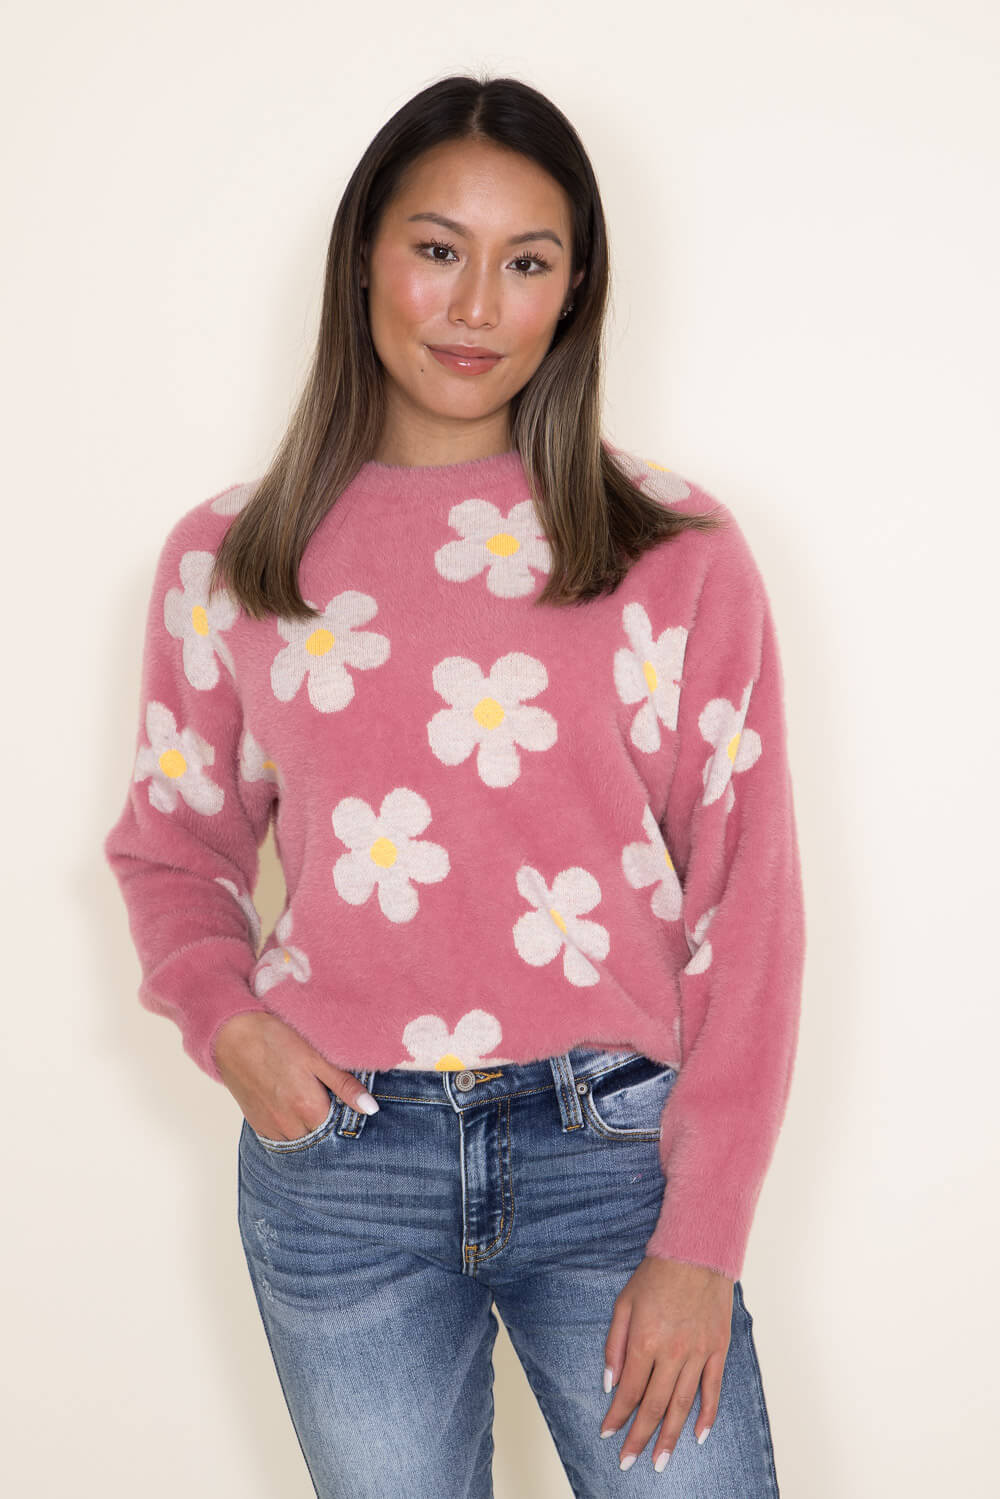 Simply Southern Fuzzy Daisy Print Crewneck Sweater for Women in